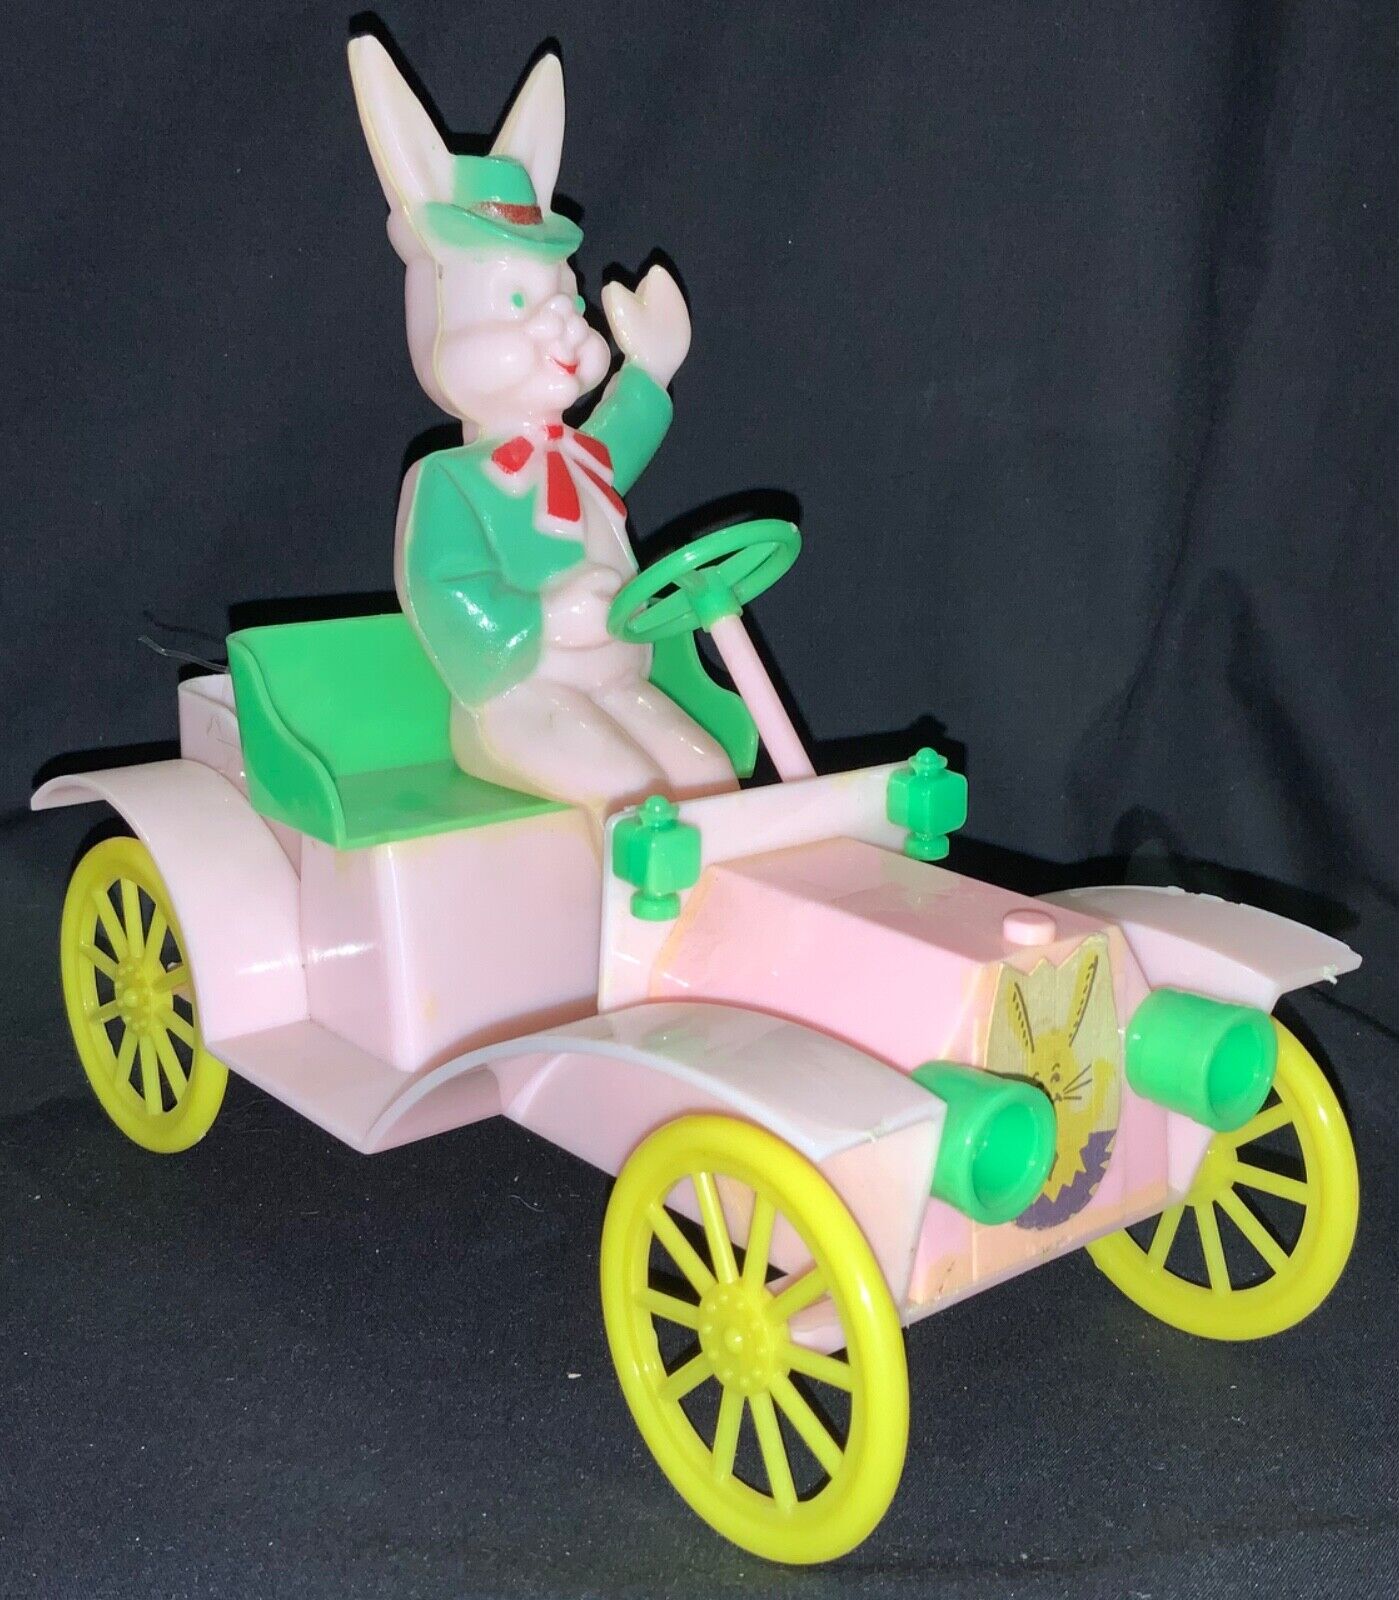 VINTAGE ROSBRO PLASTIC EASTER TOY - RABBIT DRIVING A ‘MODEL T’ AUTOMOBILE